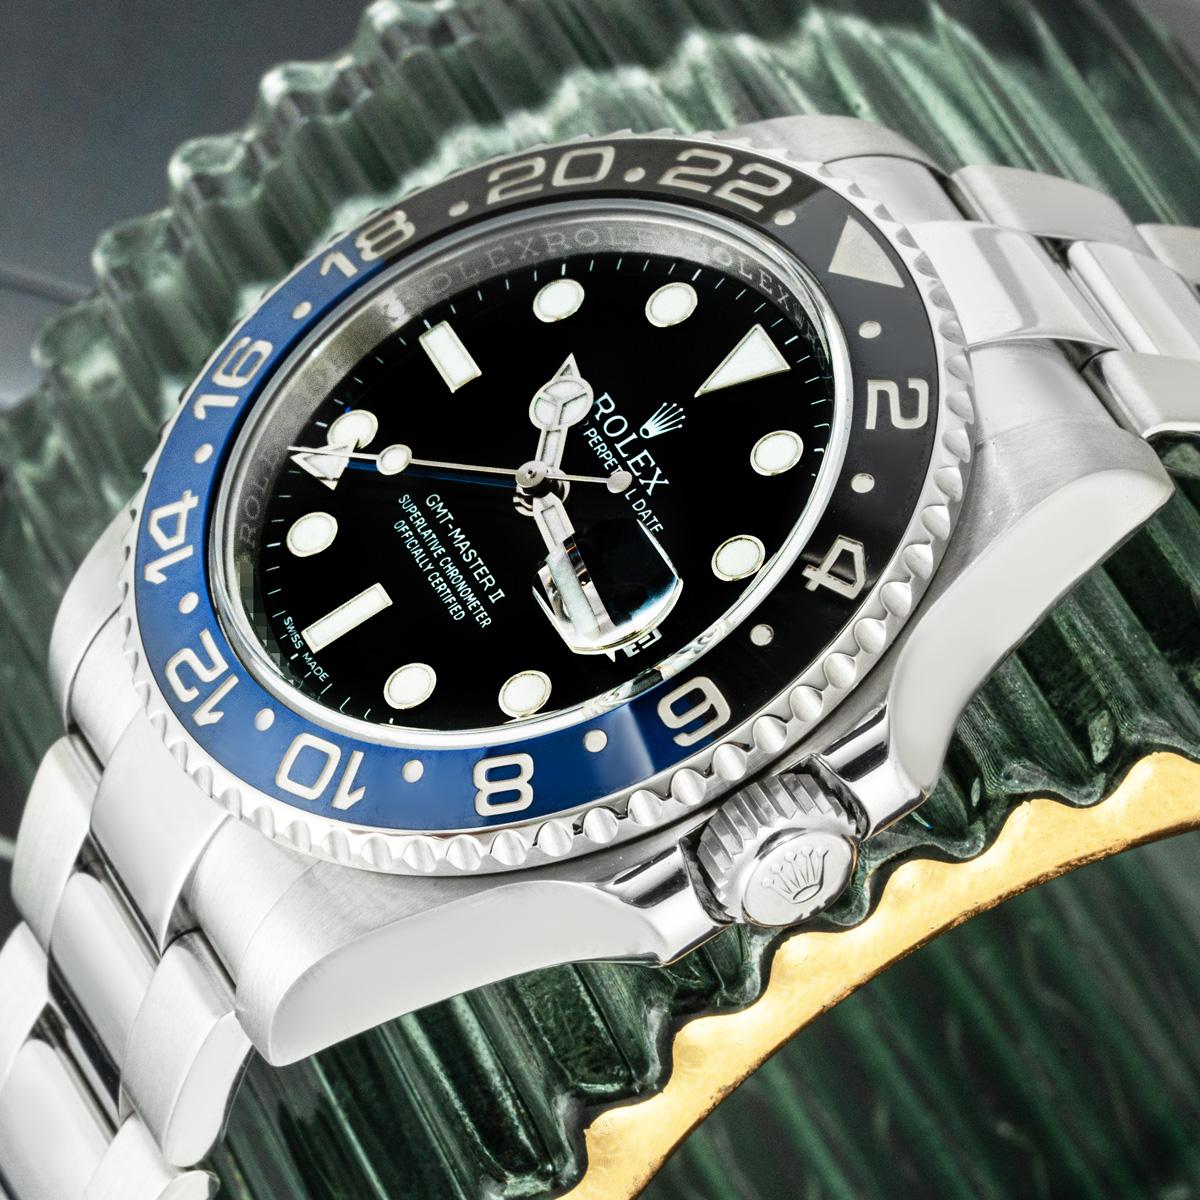 An Oystersteel GMT-Master II Batman by Rolex, featuring a black dial with the date and blue time zone hand. The ceramic black and blue bidirectional rotatable bezel features a 24-hour display. The Oyster bracelet comes equipped with a folding